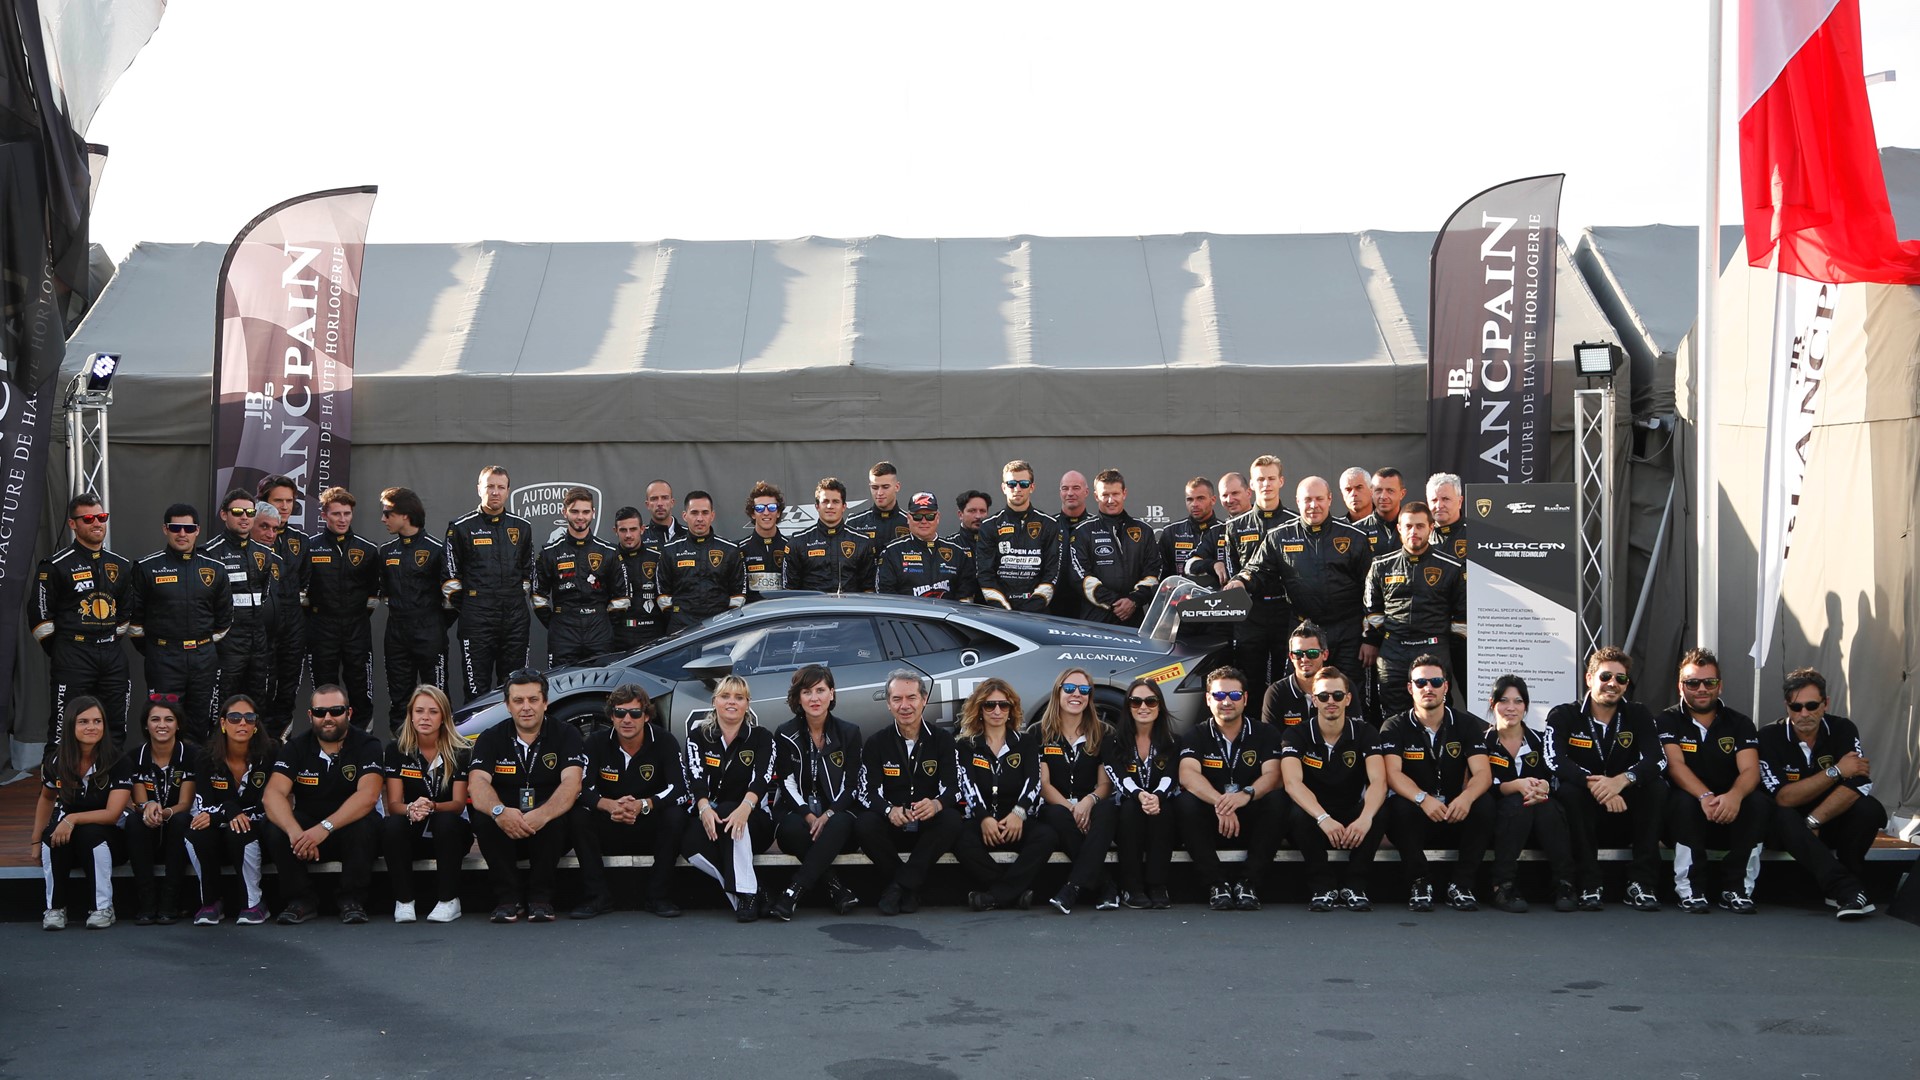 LBST Europe Drivers & Squadra Corse Team with the new Huracan LP 620-2 Super Trofeo